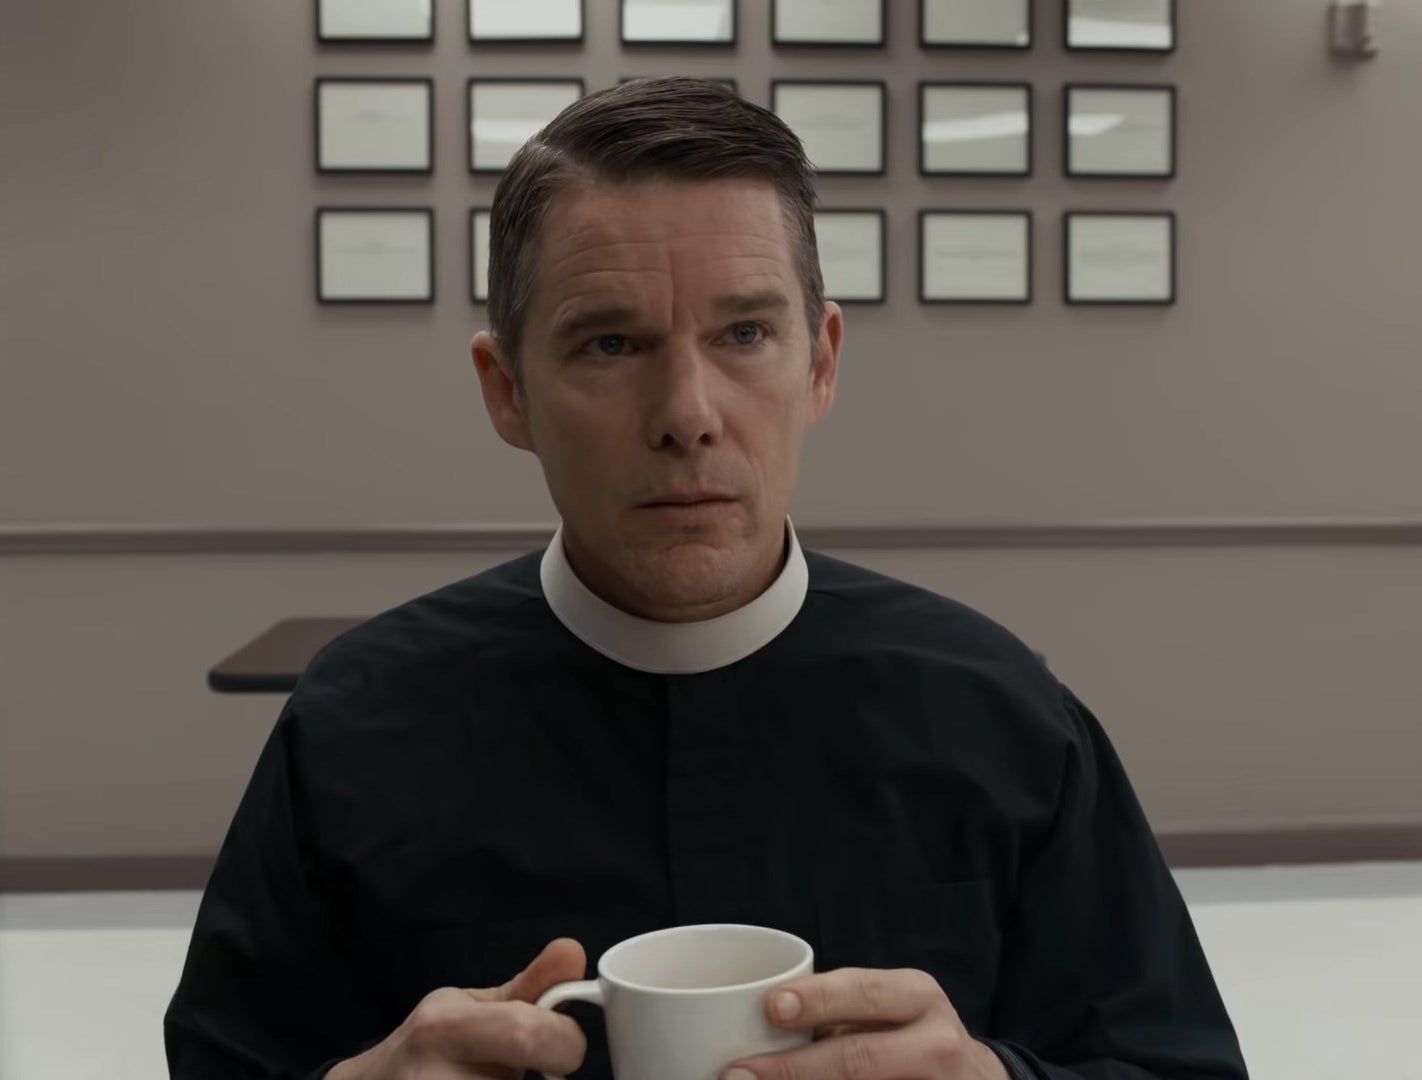 Pastor Ernst Toller holding a coffee cup in &quot;First Reformed&quot;